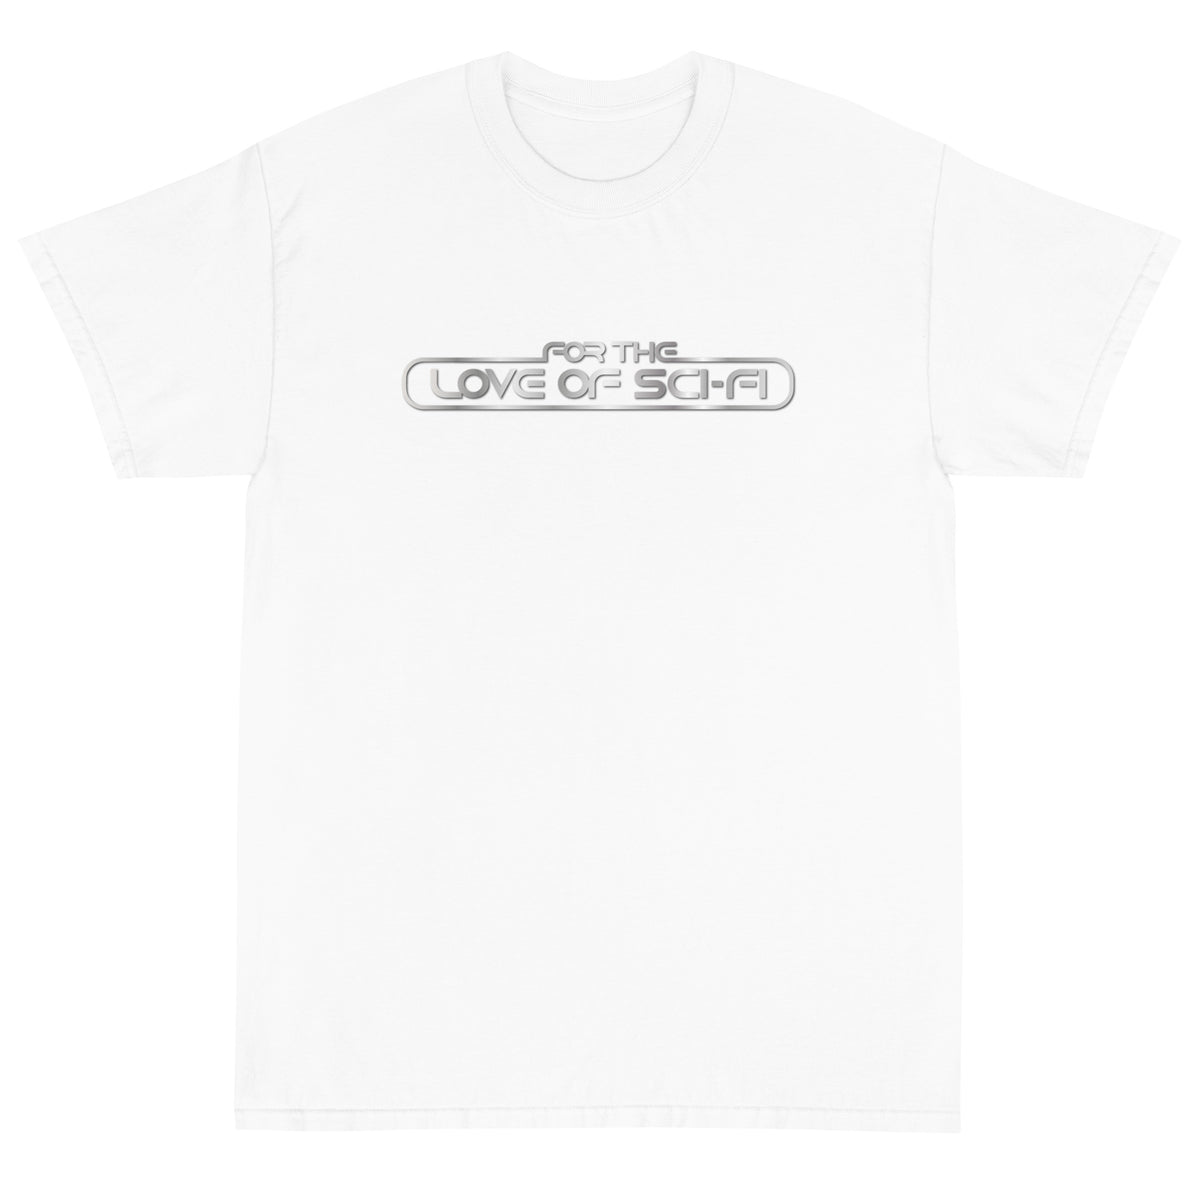 For The Love Of Sci-Fi Short Sleeve T-Shirt